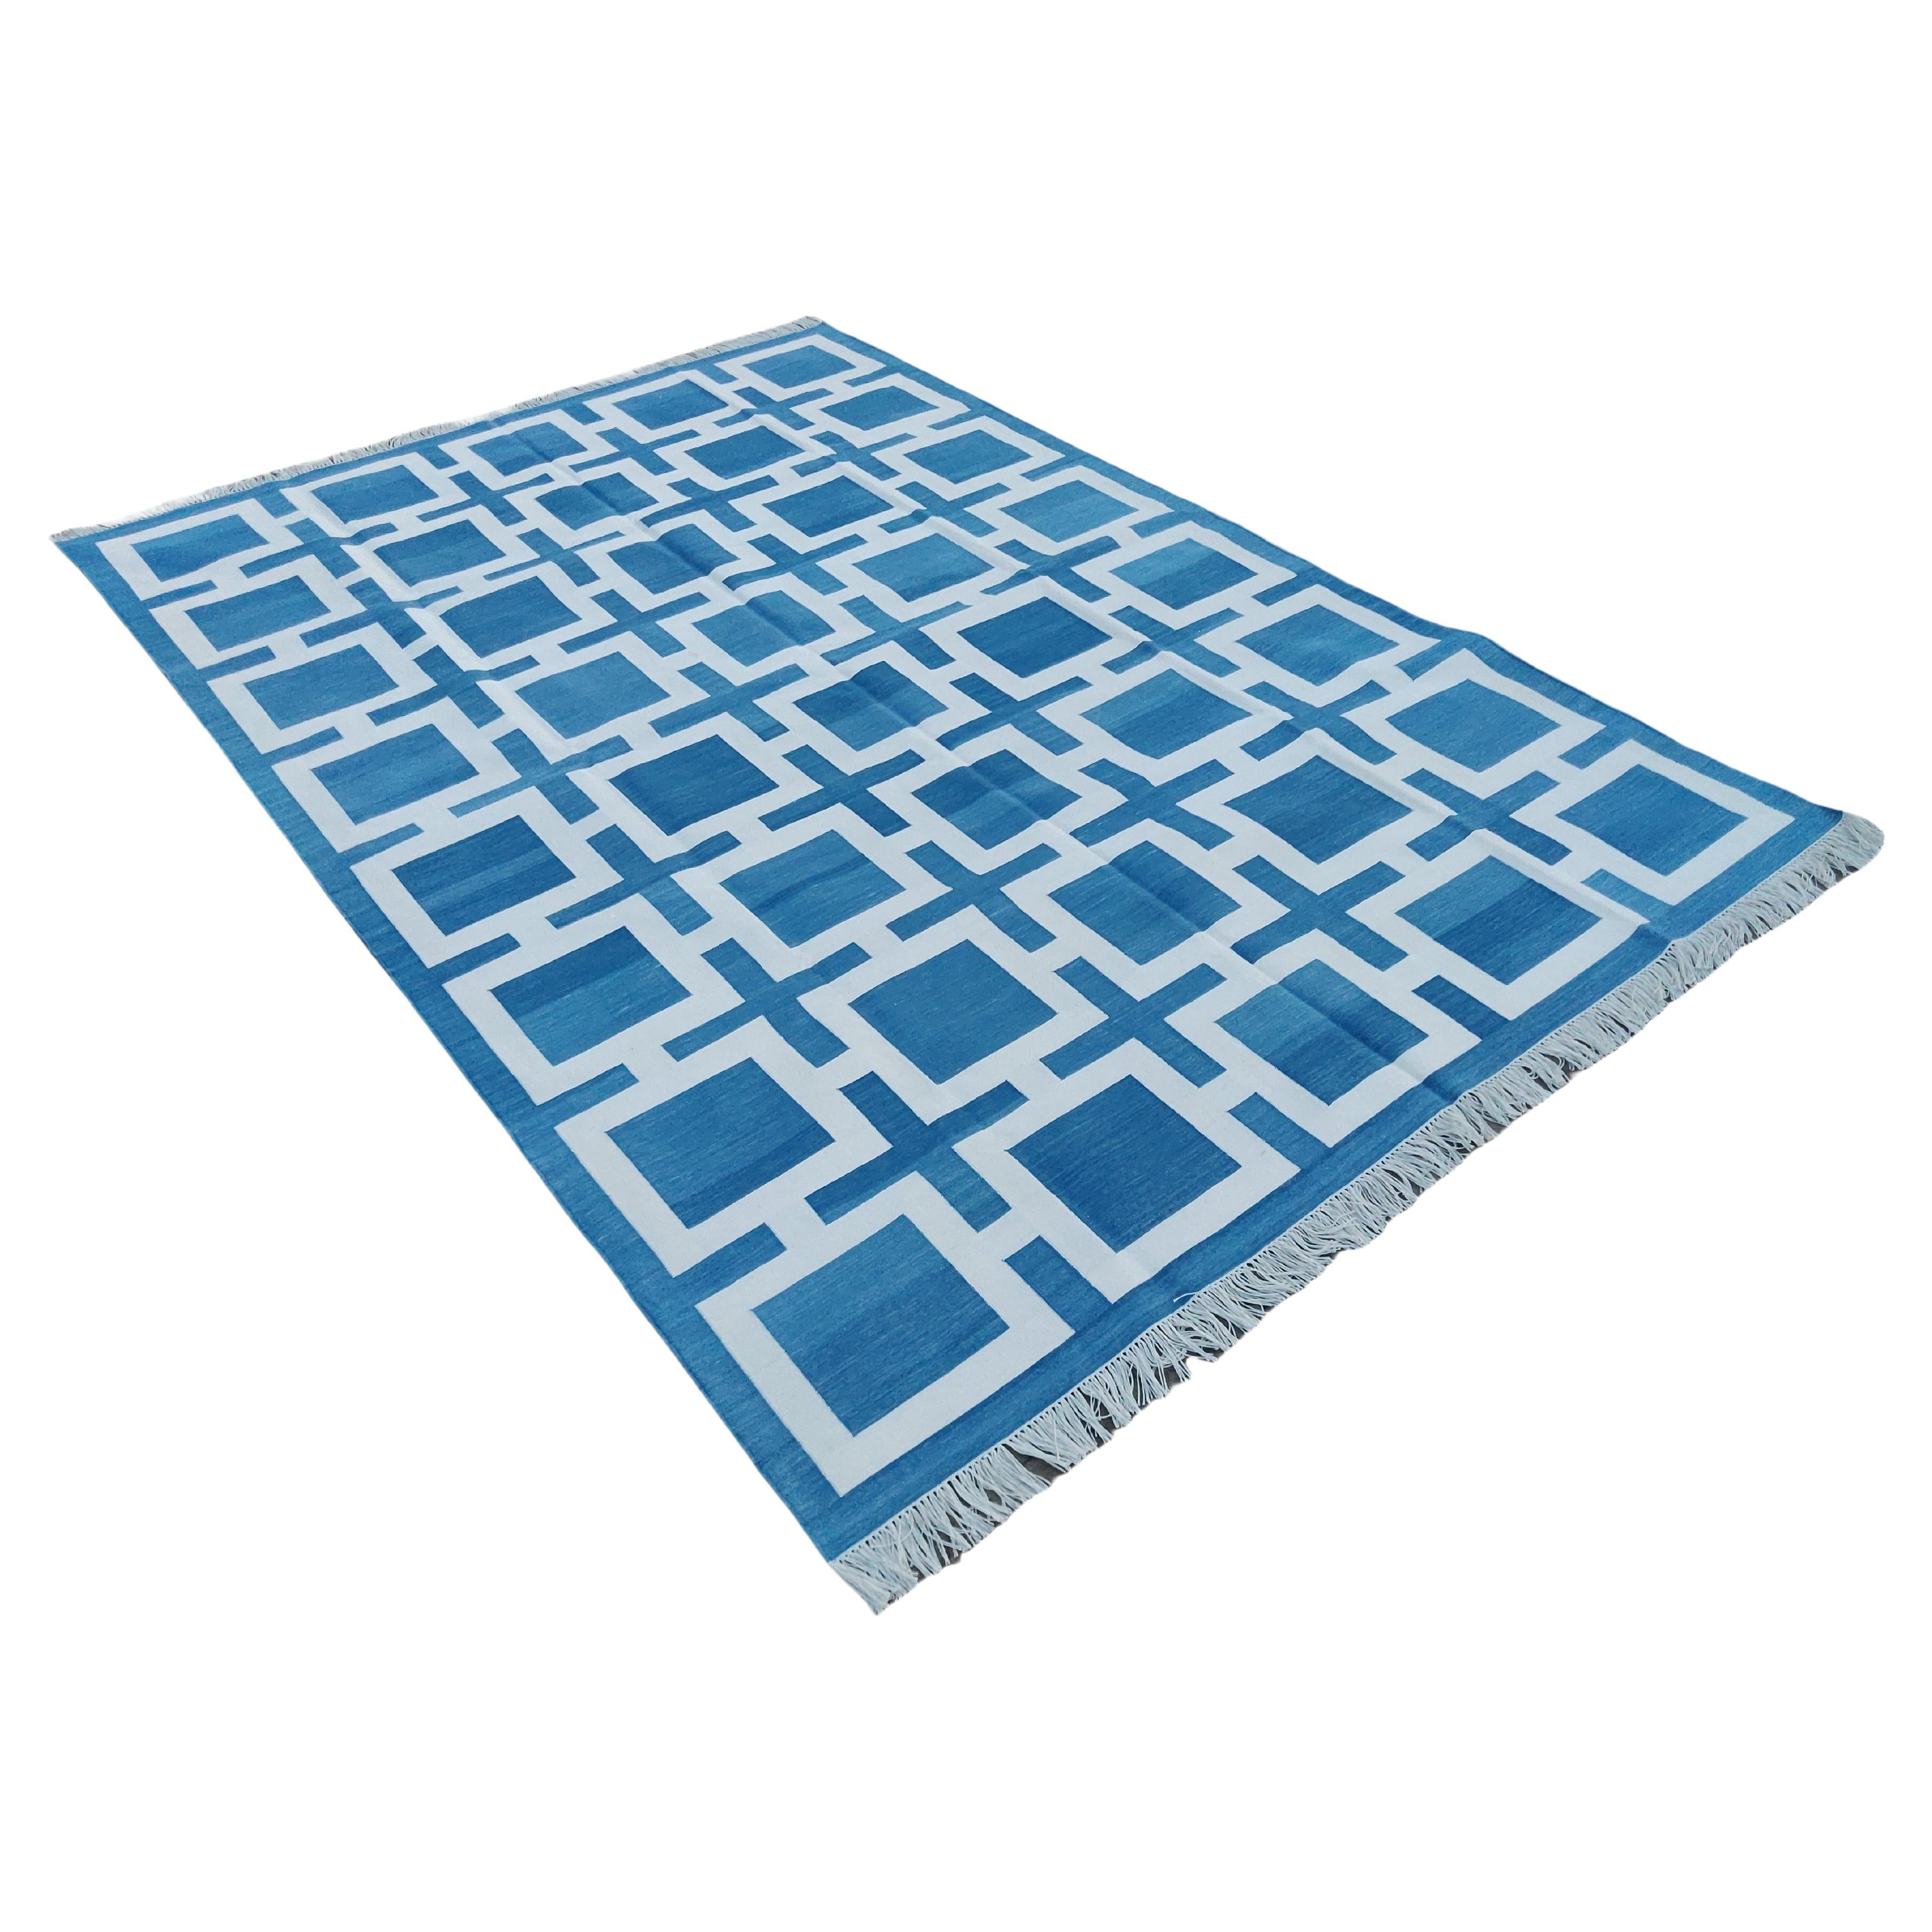 Handmade Cotton Area Flat Weave Rug, 6x9 Blue And White Geometric Indian Dhurrie For Sale